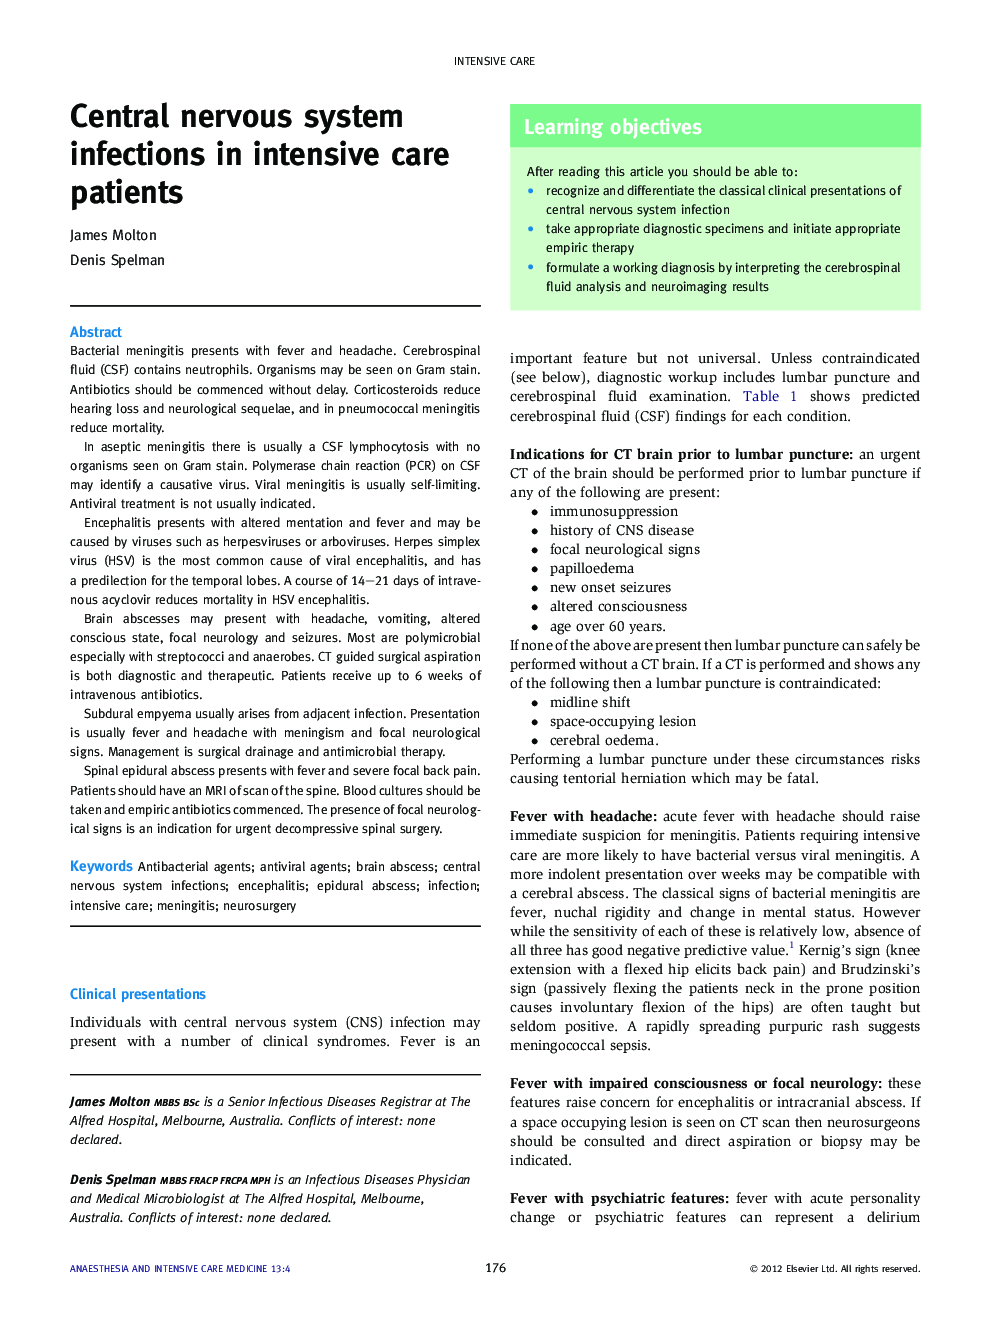 Central nervous system infections in intensive care patients